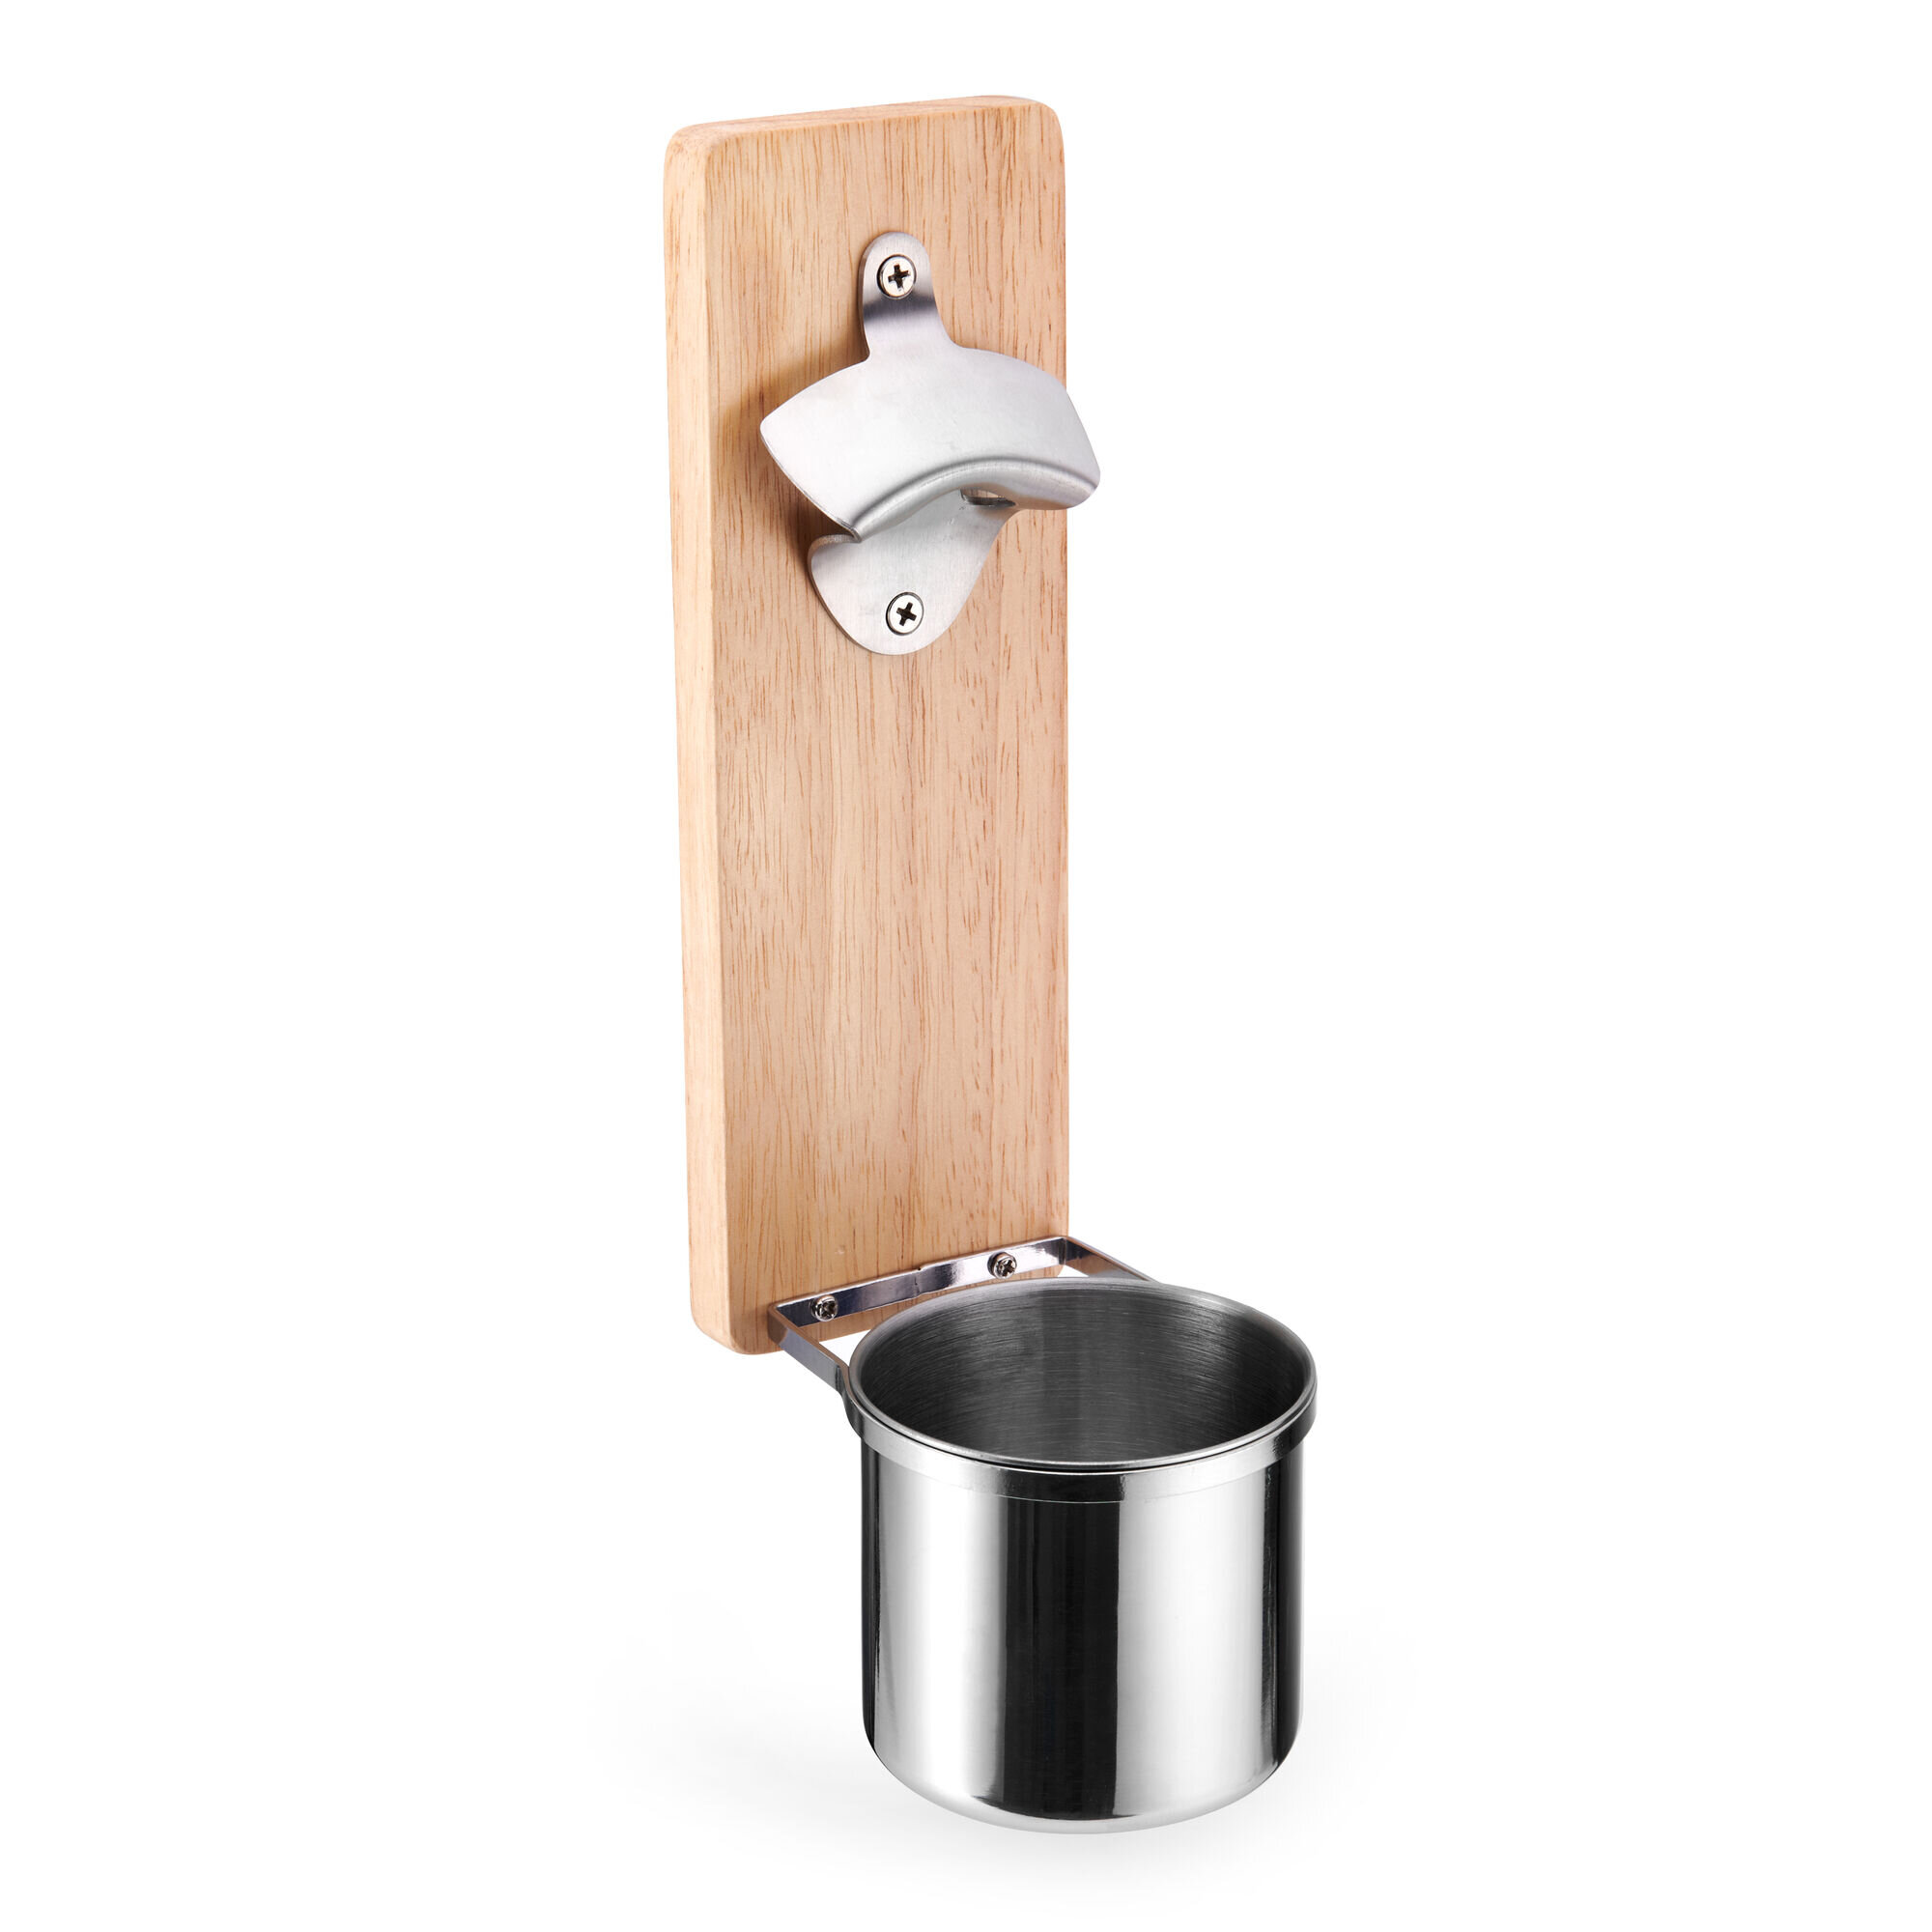 Farberware BBQ Magnetic Bottle Opener with Cup Holder, 11.5 Inch, Stainless  Steel and Wood